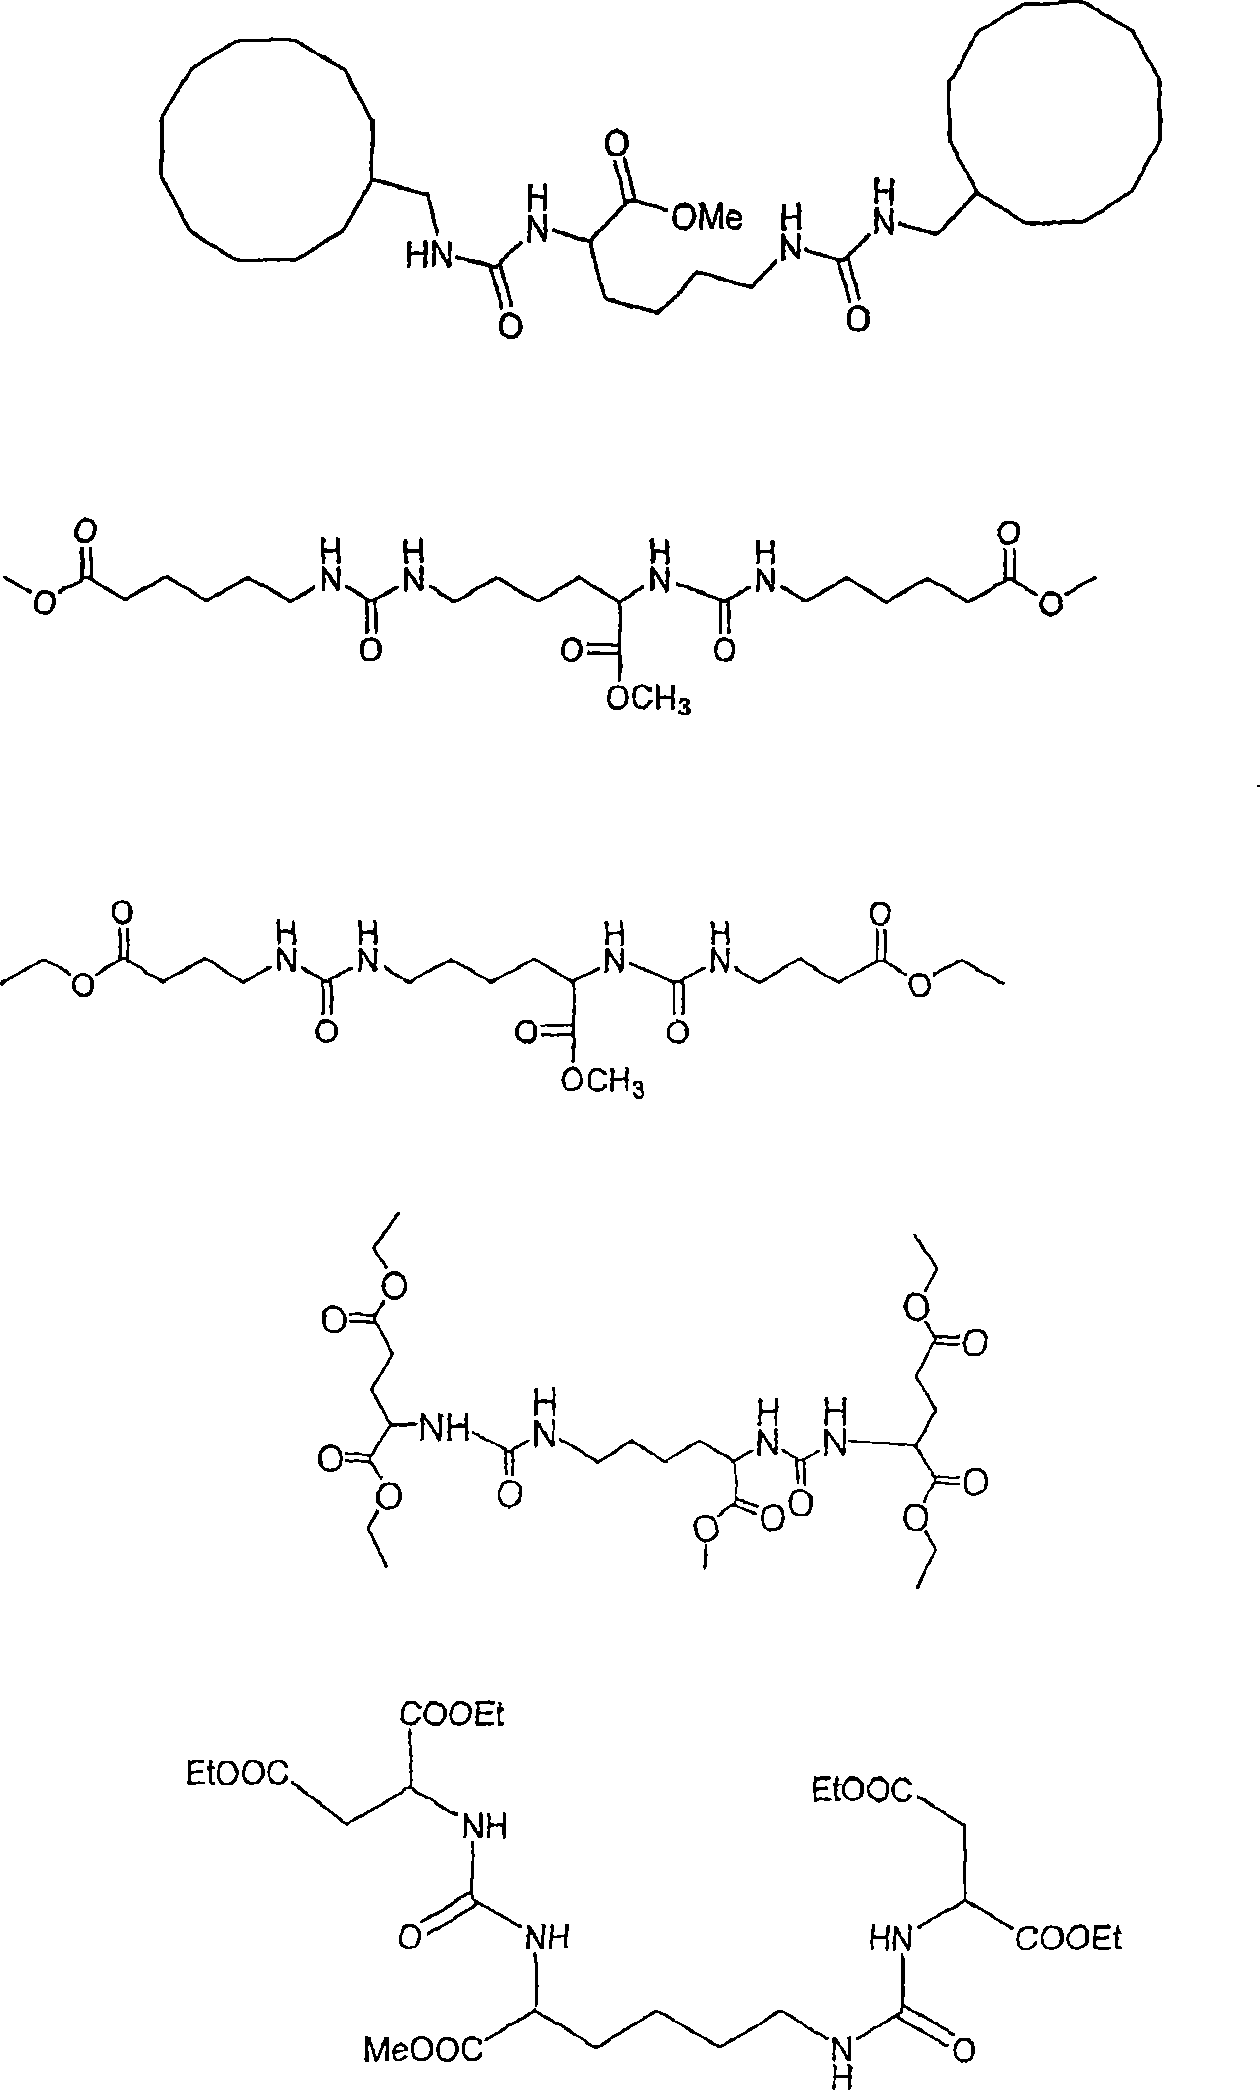 Coating compositions containing rheology control agents